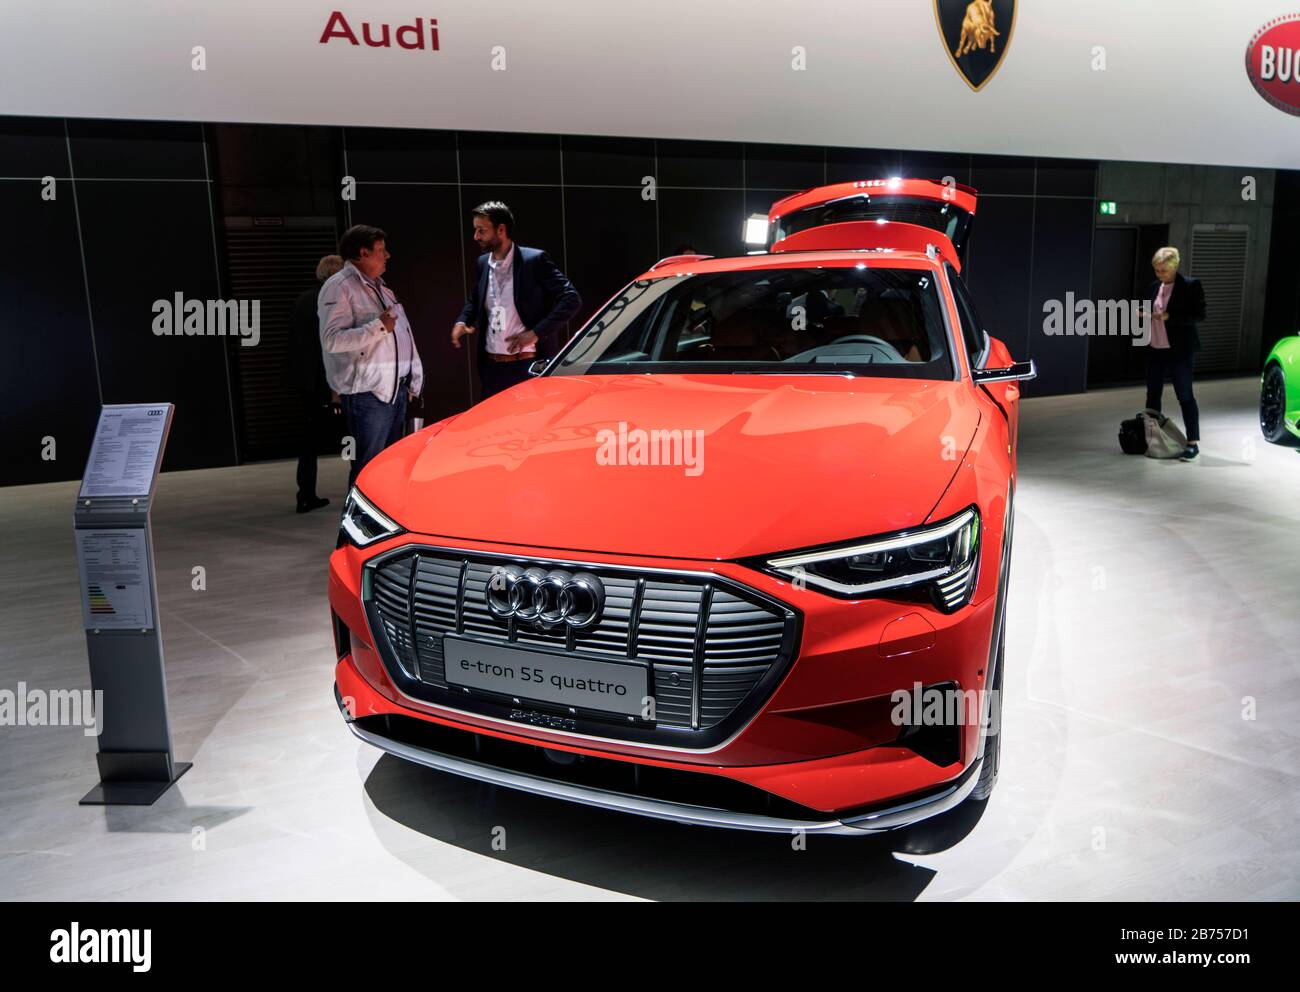 Germany, Berlin, May 14, 2019 Annual General Meeting of Volkswagen AG in Berlin on May 14, 2019 Audi e-tron 55 quattro. [automated translation] Stock Photo